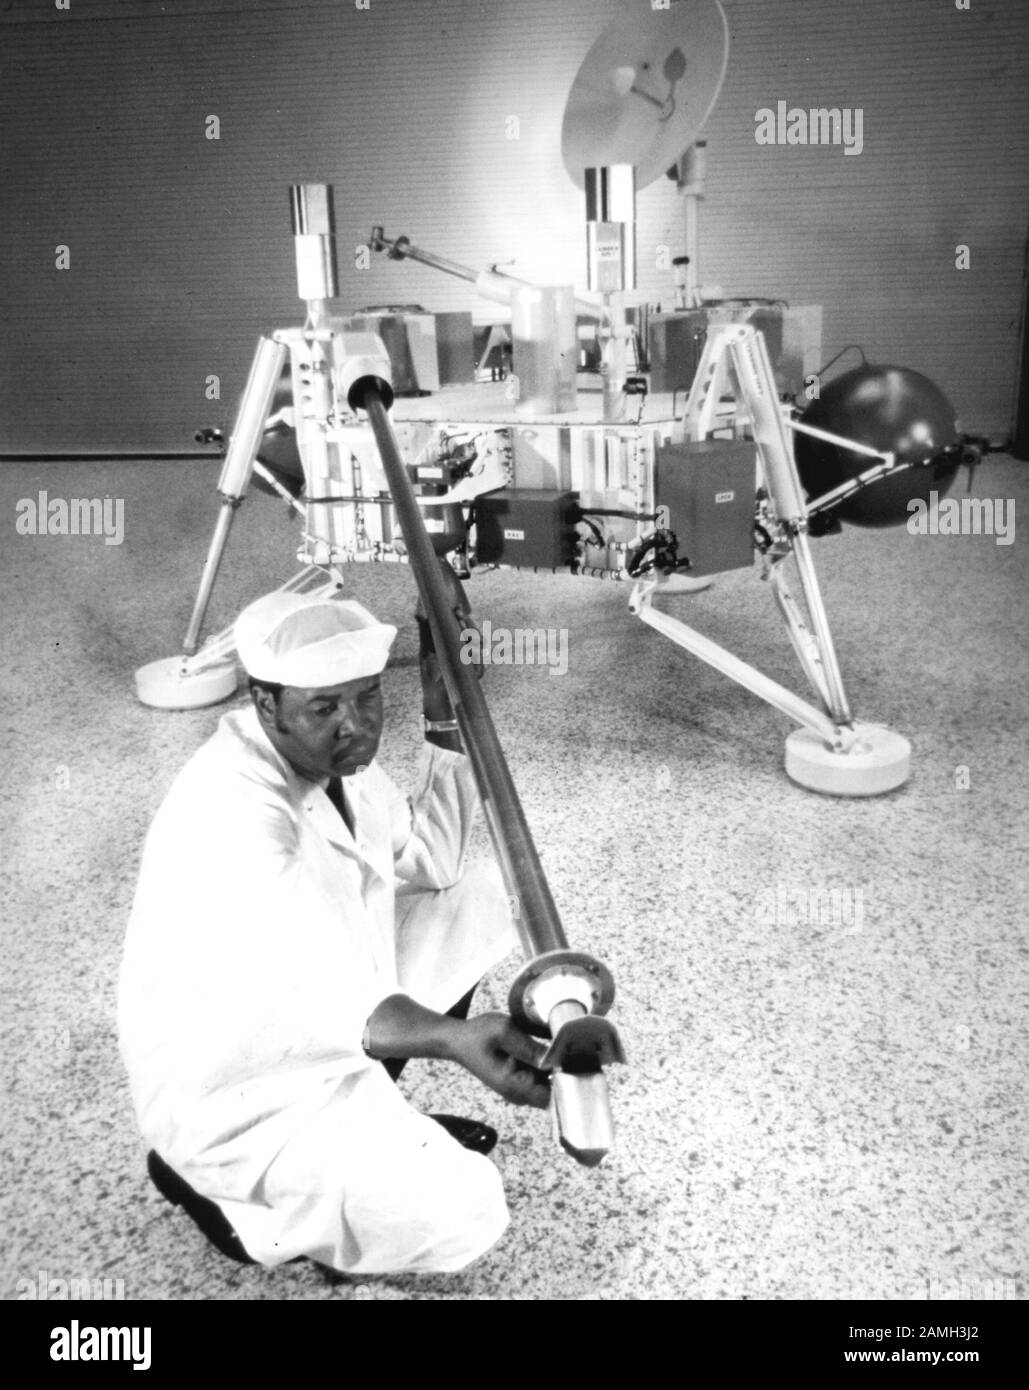 Technician checks the soil sampler of the Viking lander, featuring the robotic arm which was used to scoop up a sample of the Martian soil, at Langley Research Center, Hampton, Virginia, United States, May 20, 1971. Image courtesy NASA. () Stock Photo